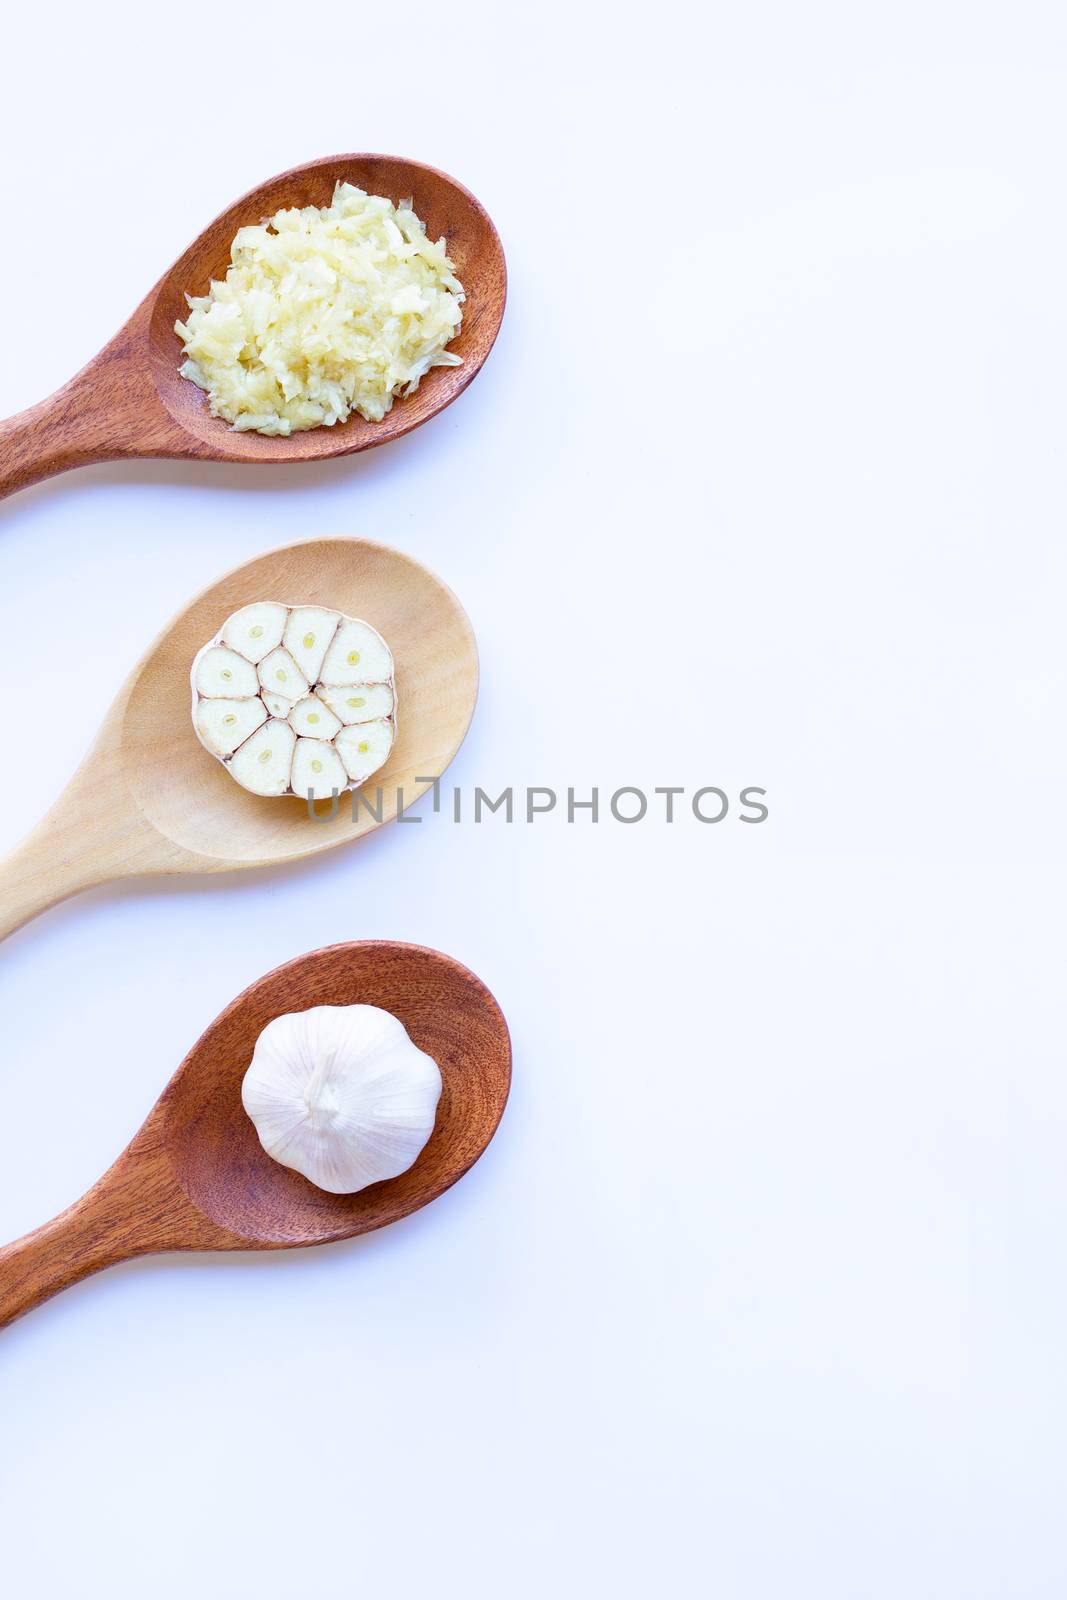 Garlic on wooden spoon on white by Bowonpat